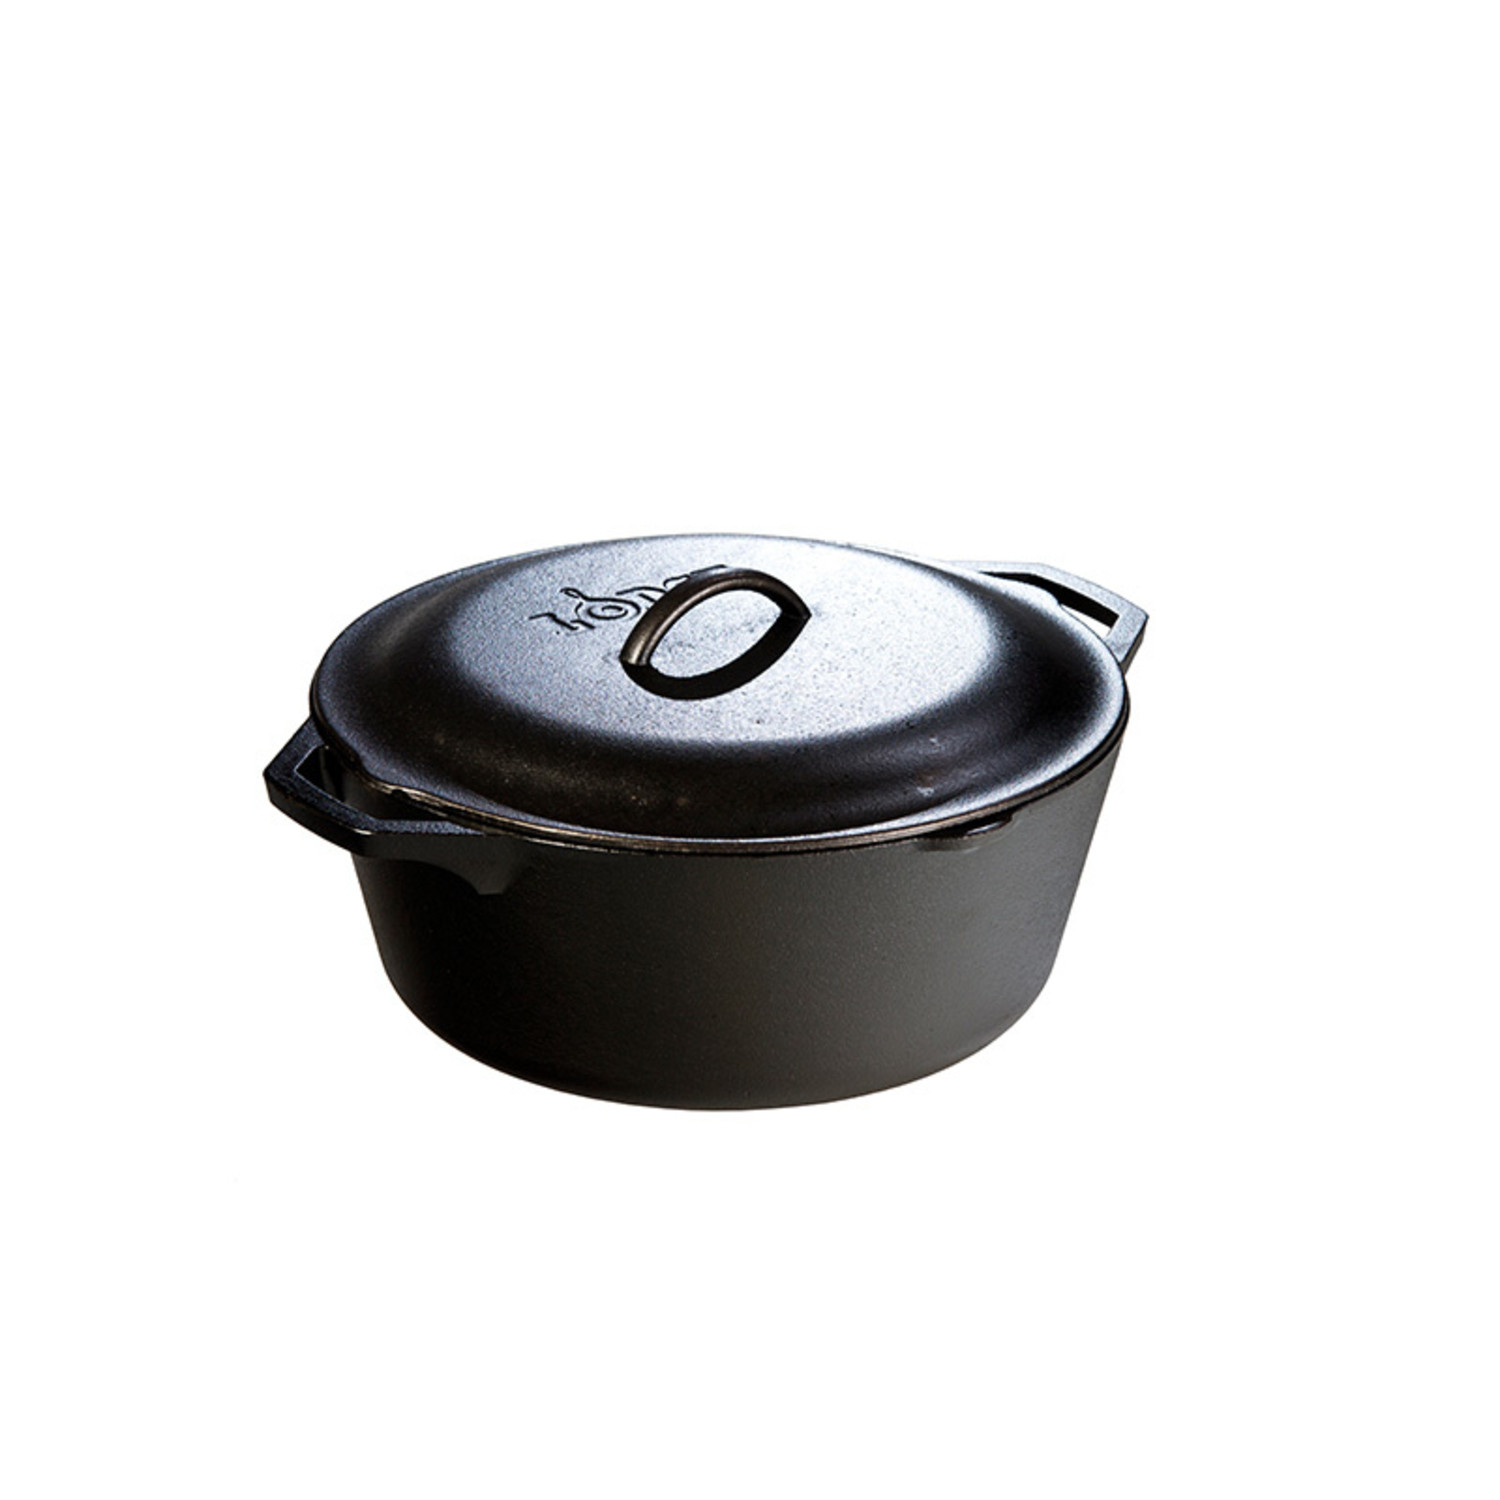 Lodge 2 Quart Cast Iron Dutch Oven. Pre-seasoned Pot with Lid for Cooking,  Basting, or Baking 